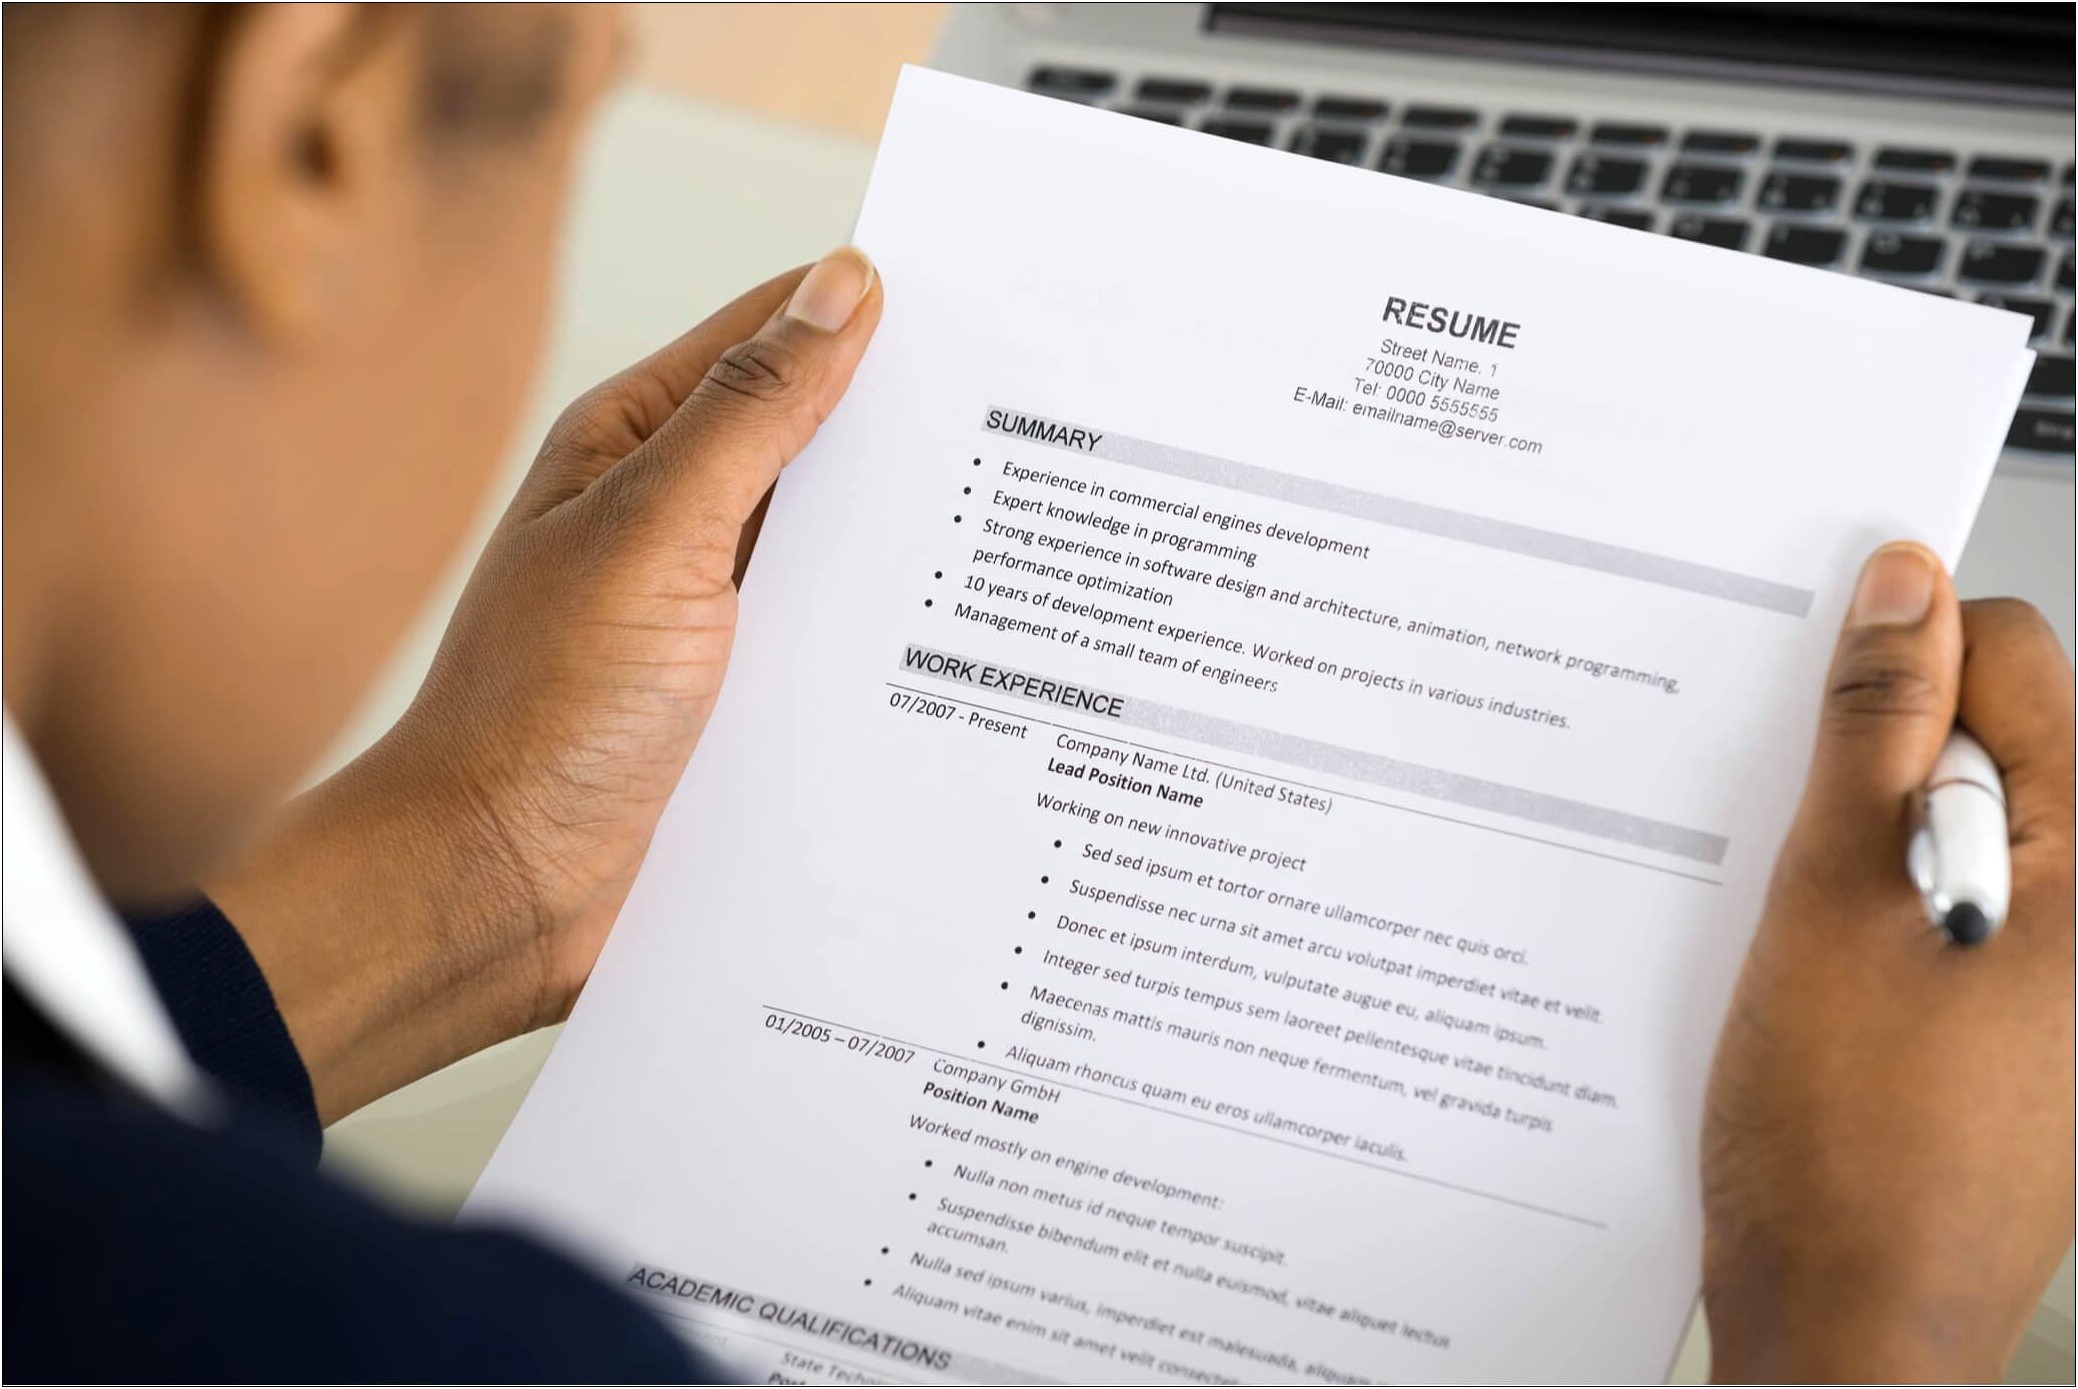 Should You Leave Work Experience On Resume